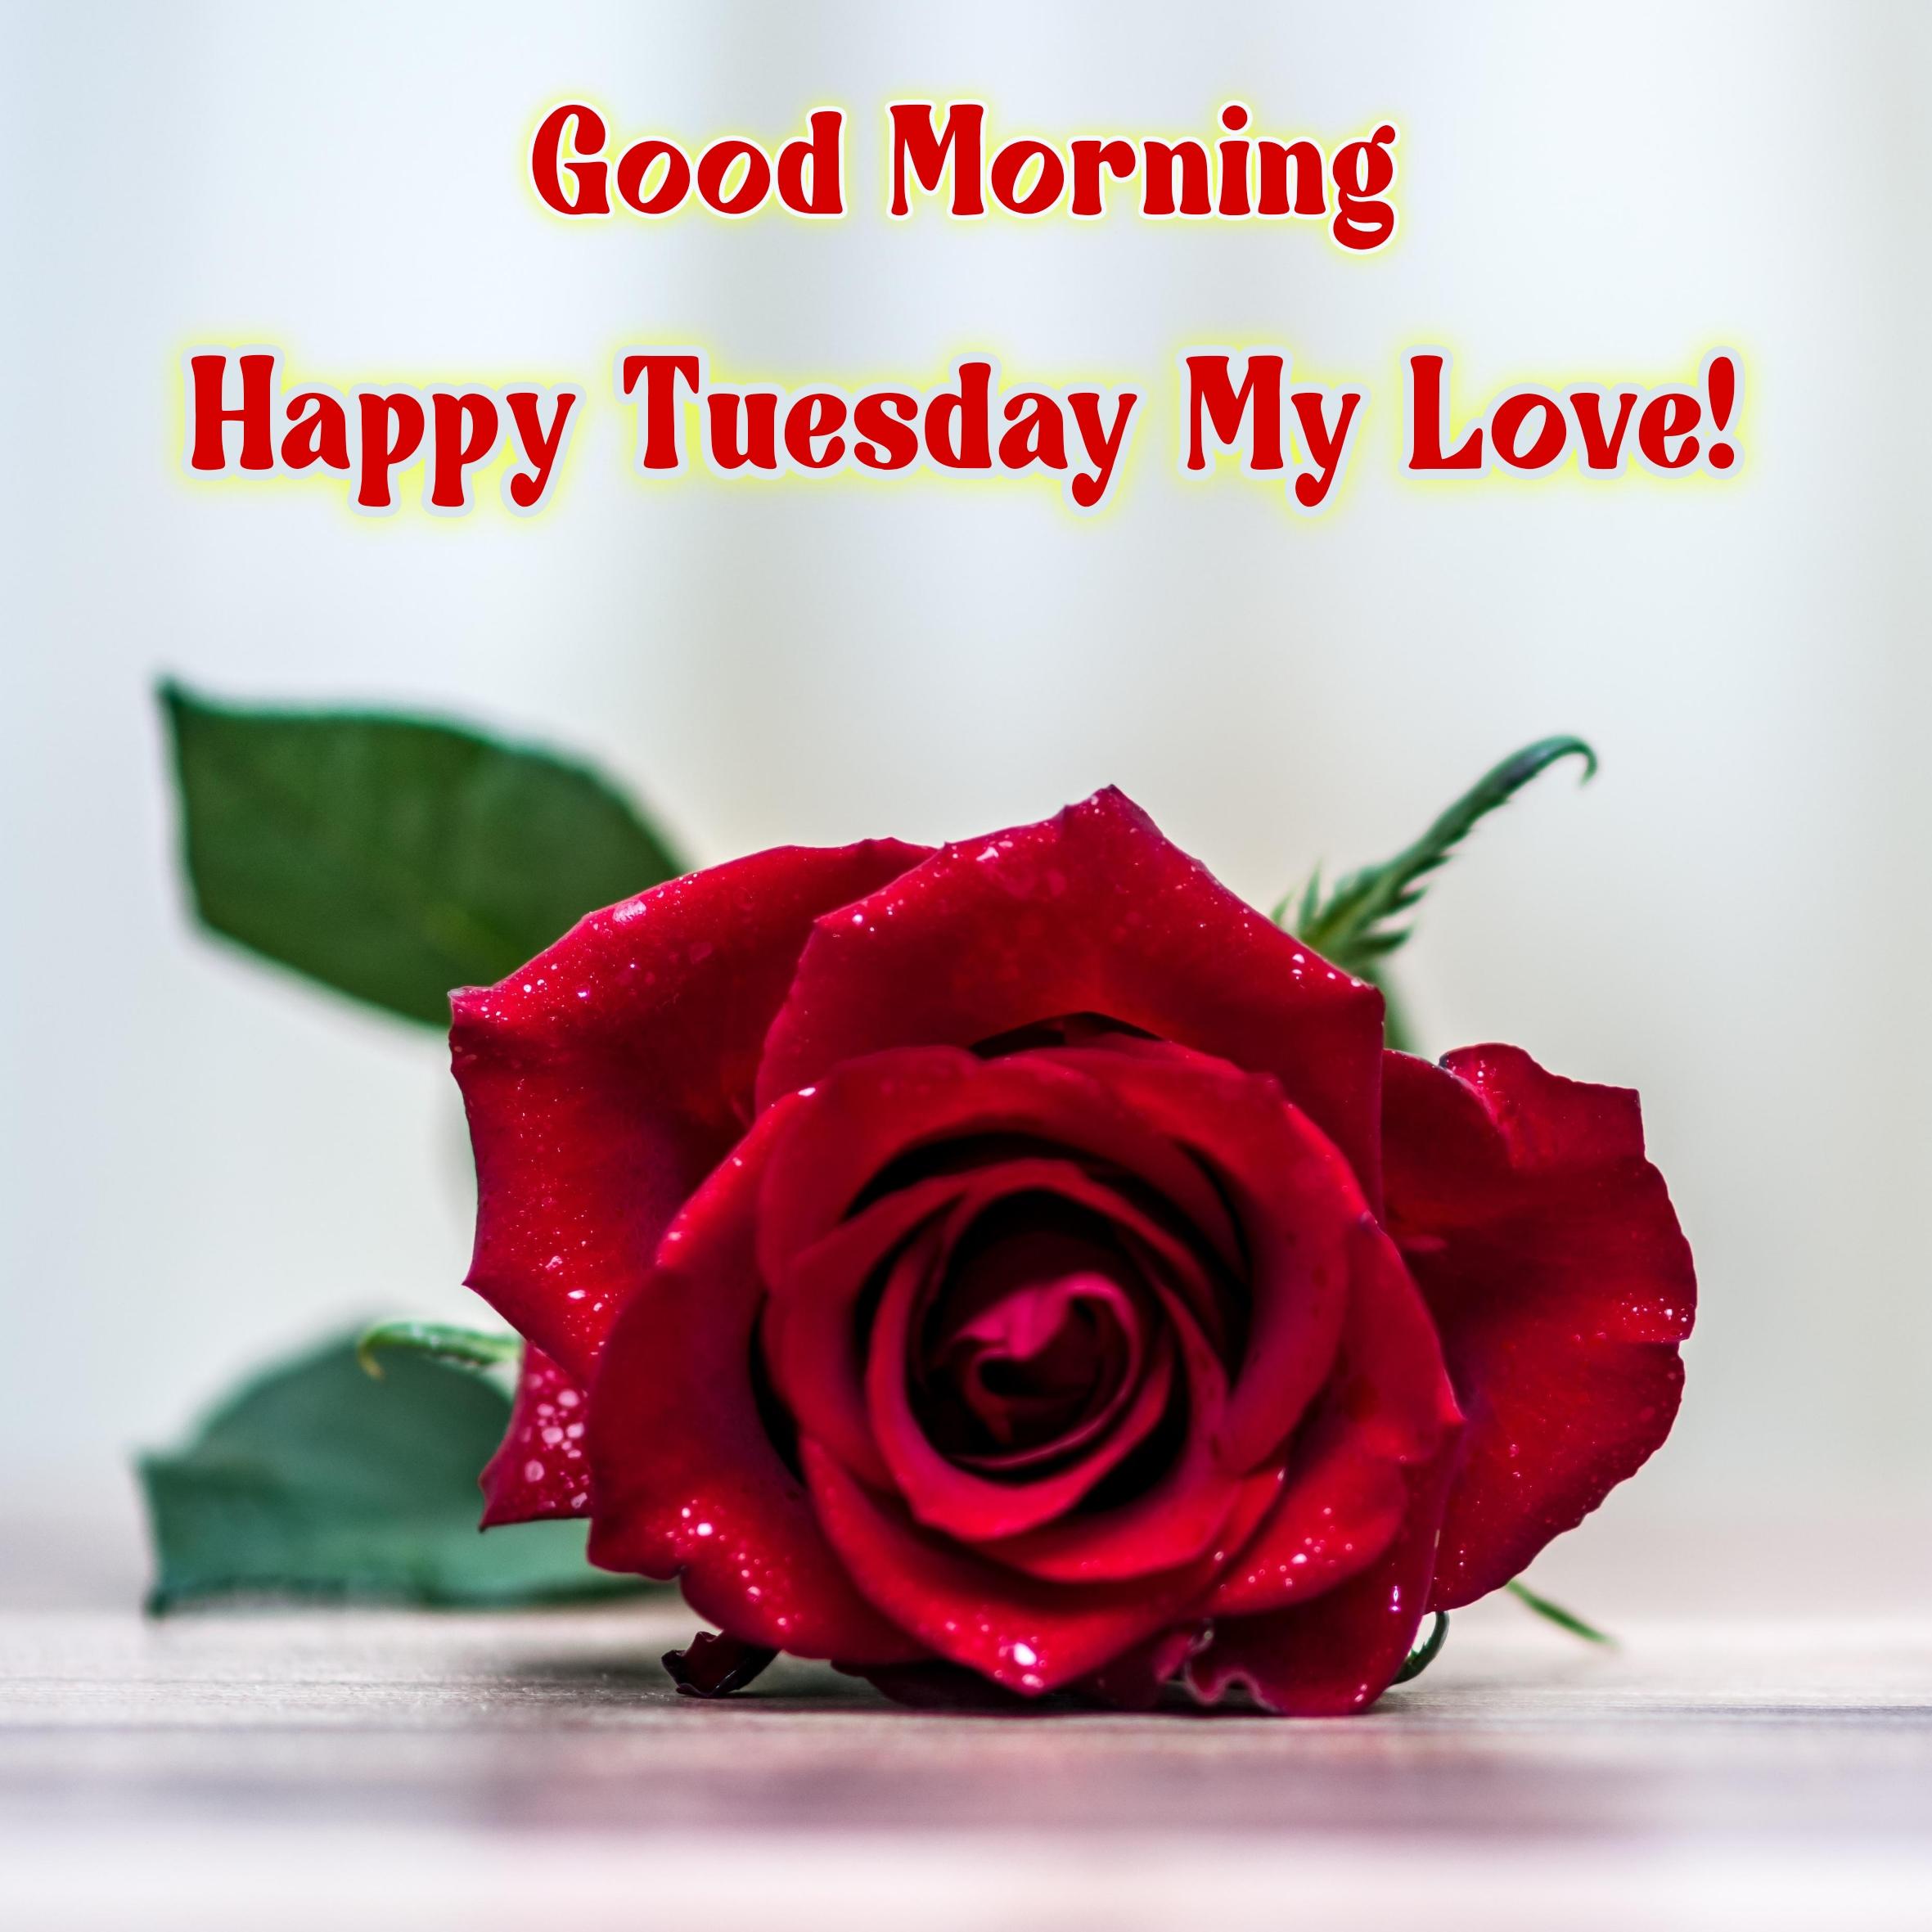 Good Morning Happy Tuesday My Love Images